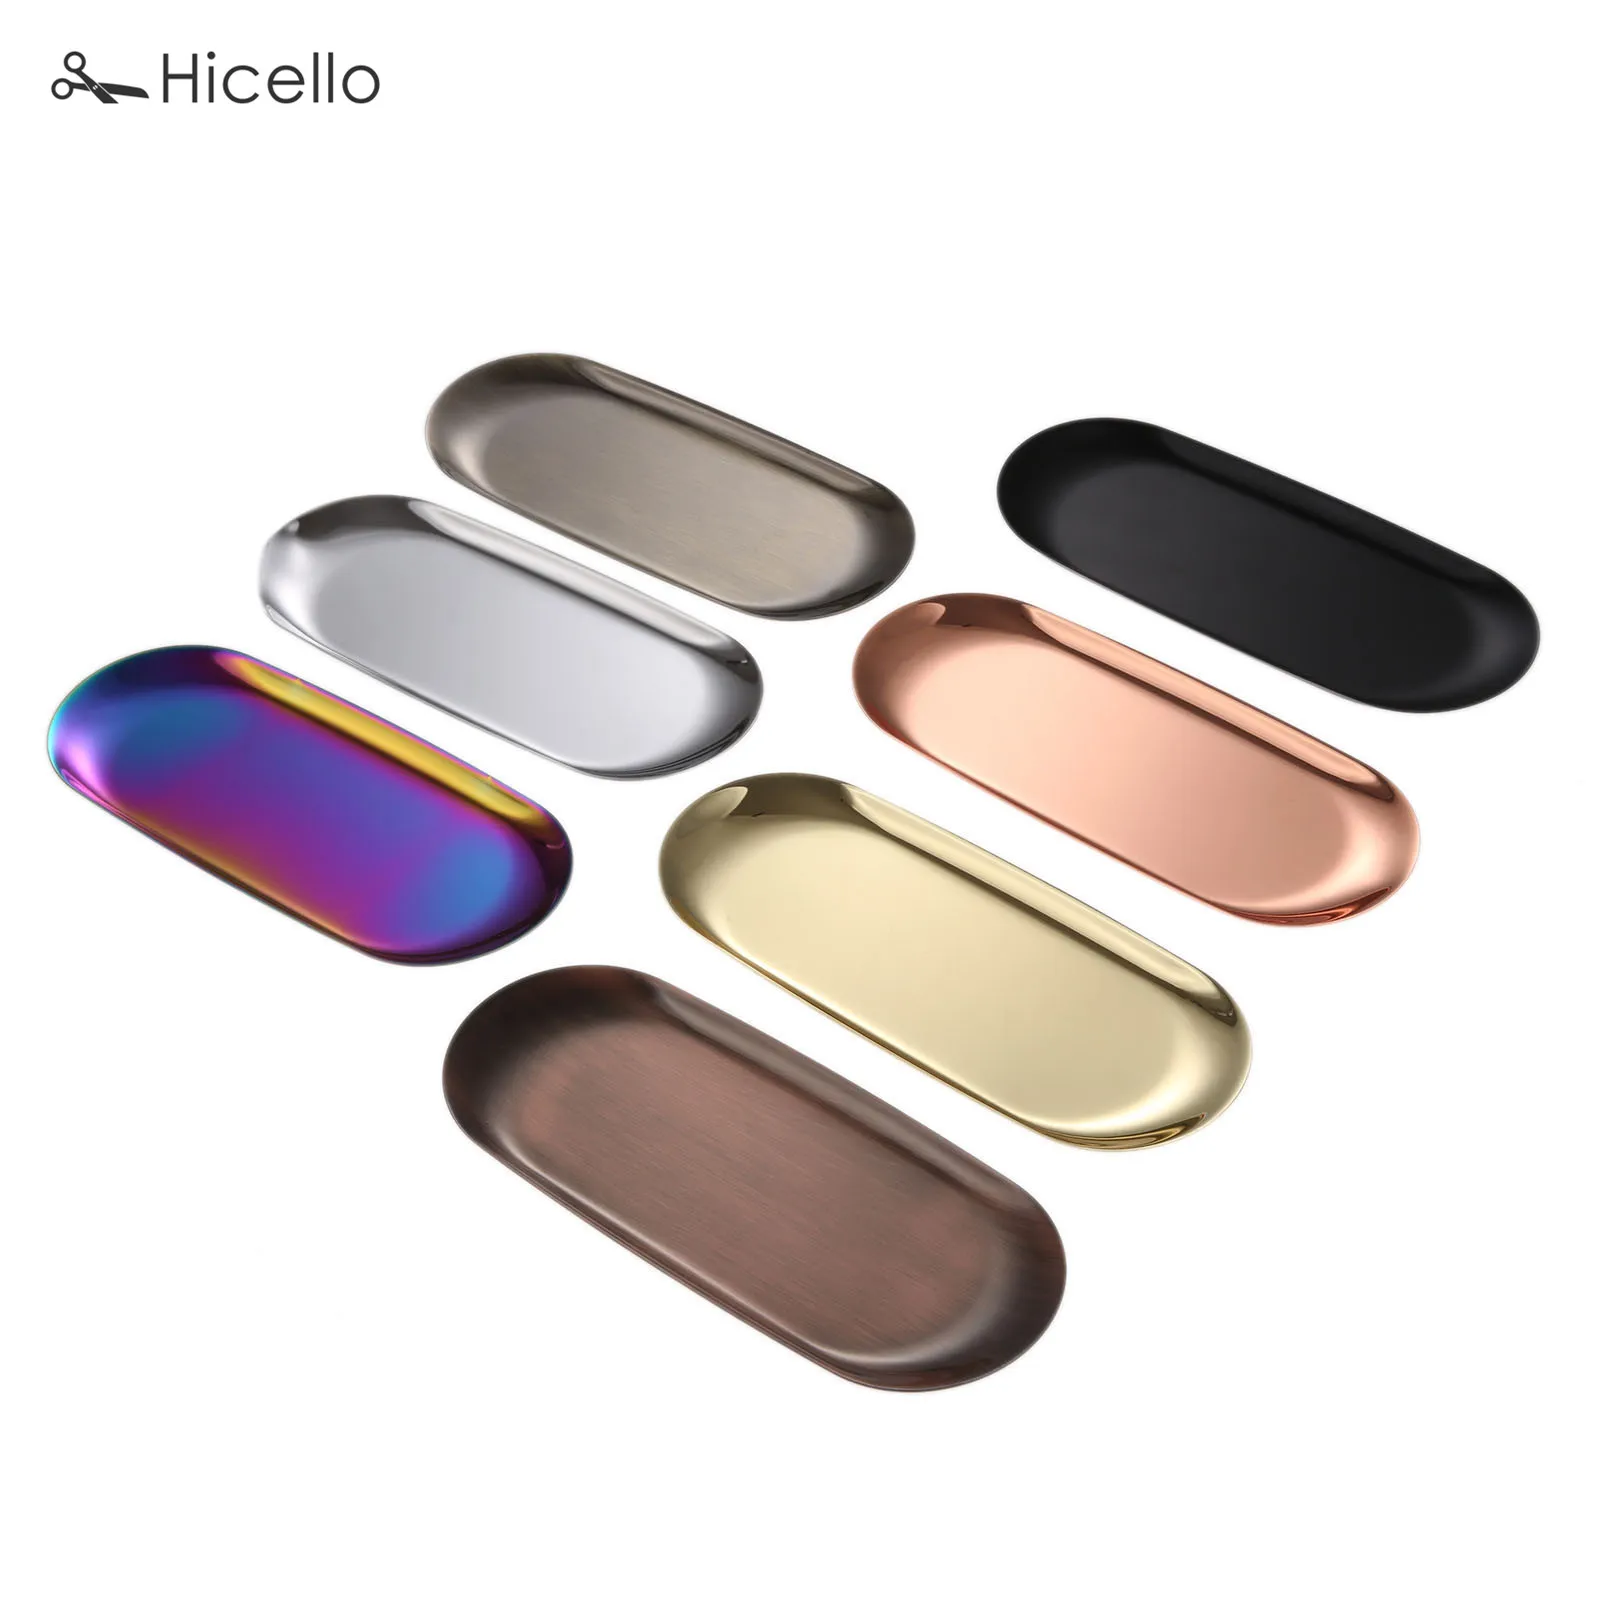 Candle Tray Stainless Steel Storage Plate Cosmetics Nordic Style Oval Aromatherapy small dish Rose Gold Silver Black Bronze